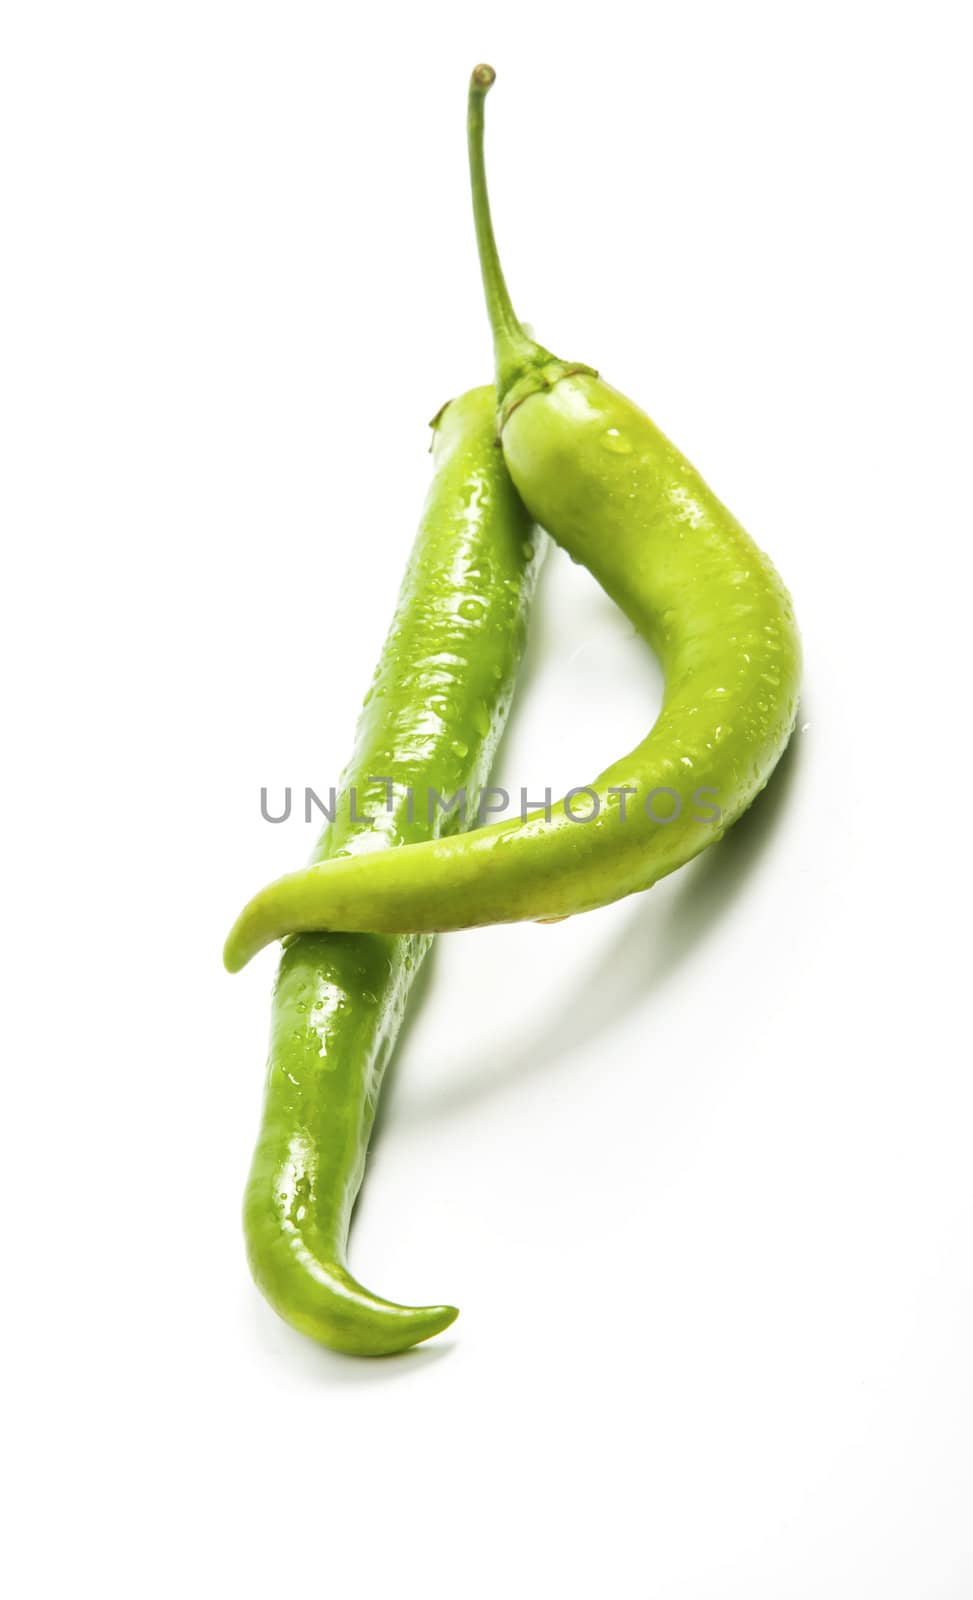 Green chili peppers composition isolated on white